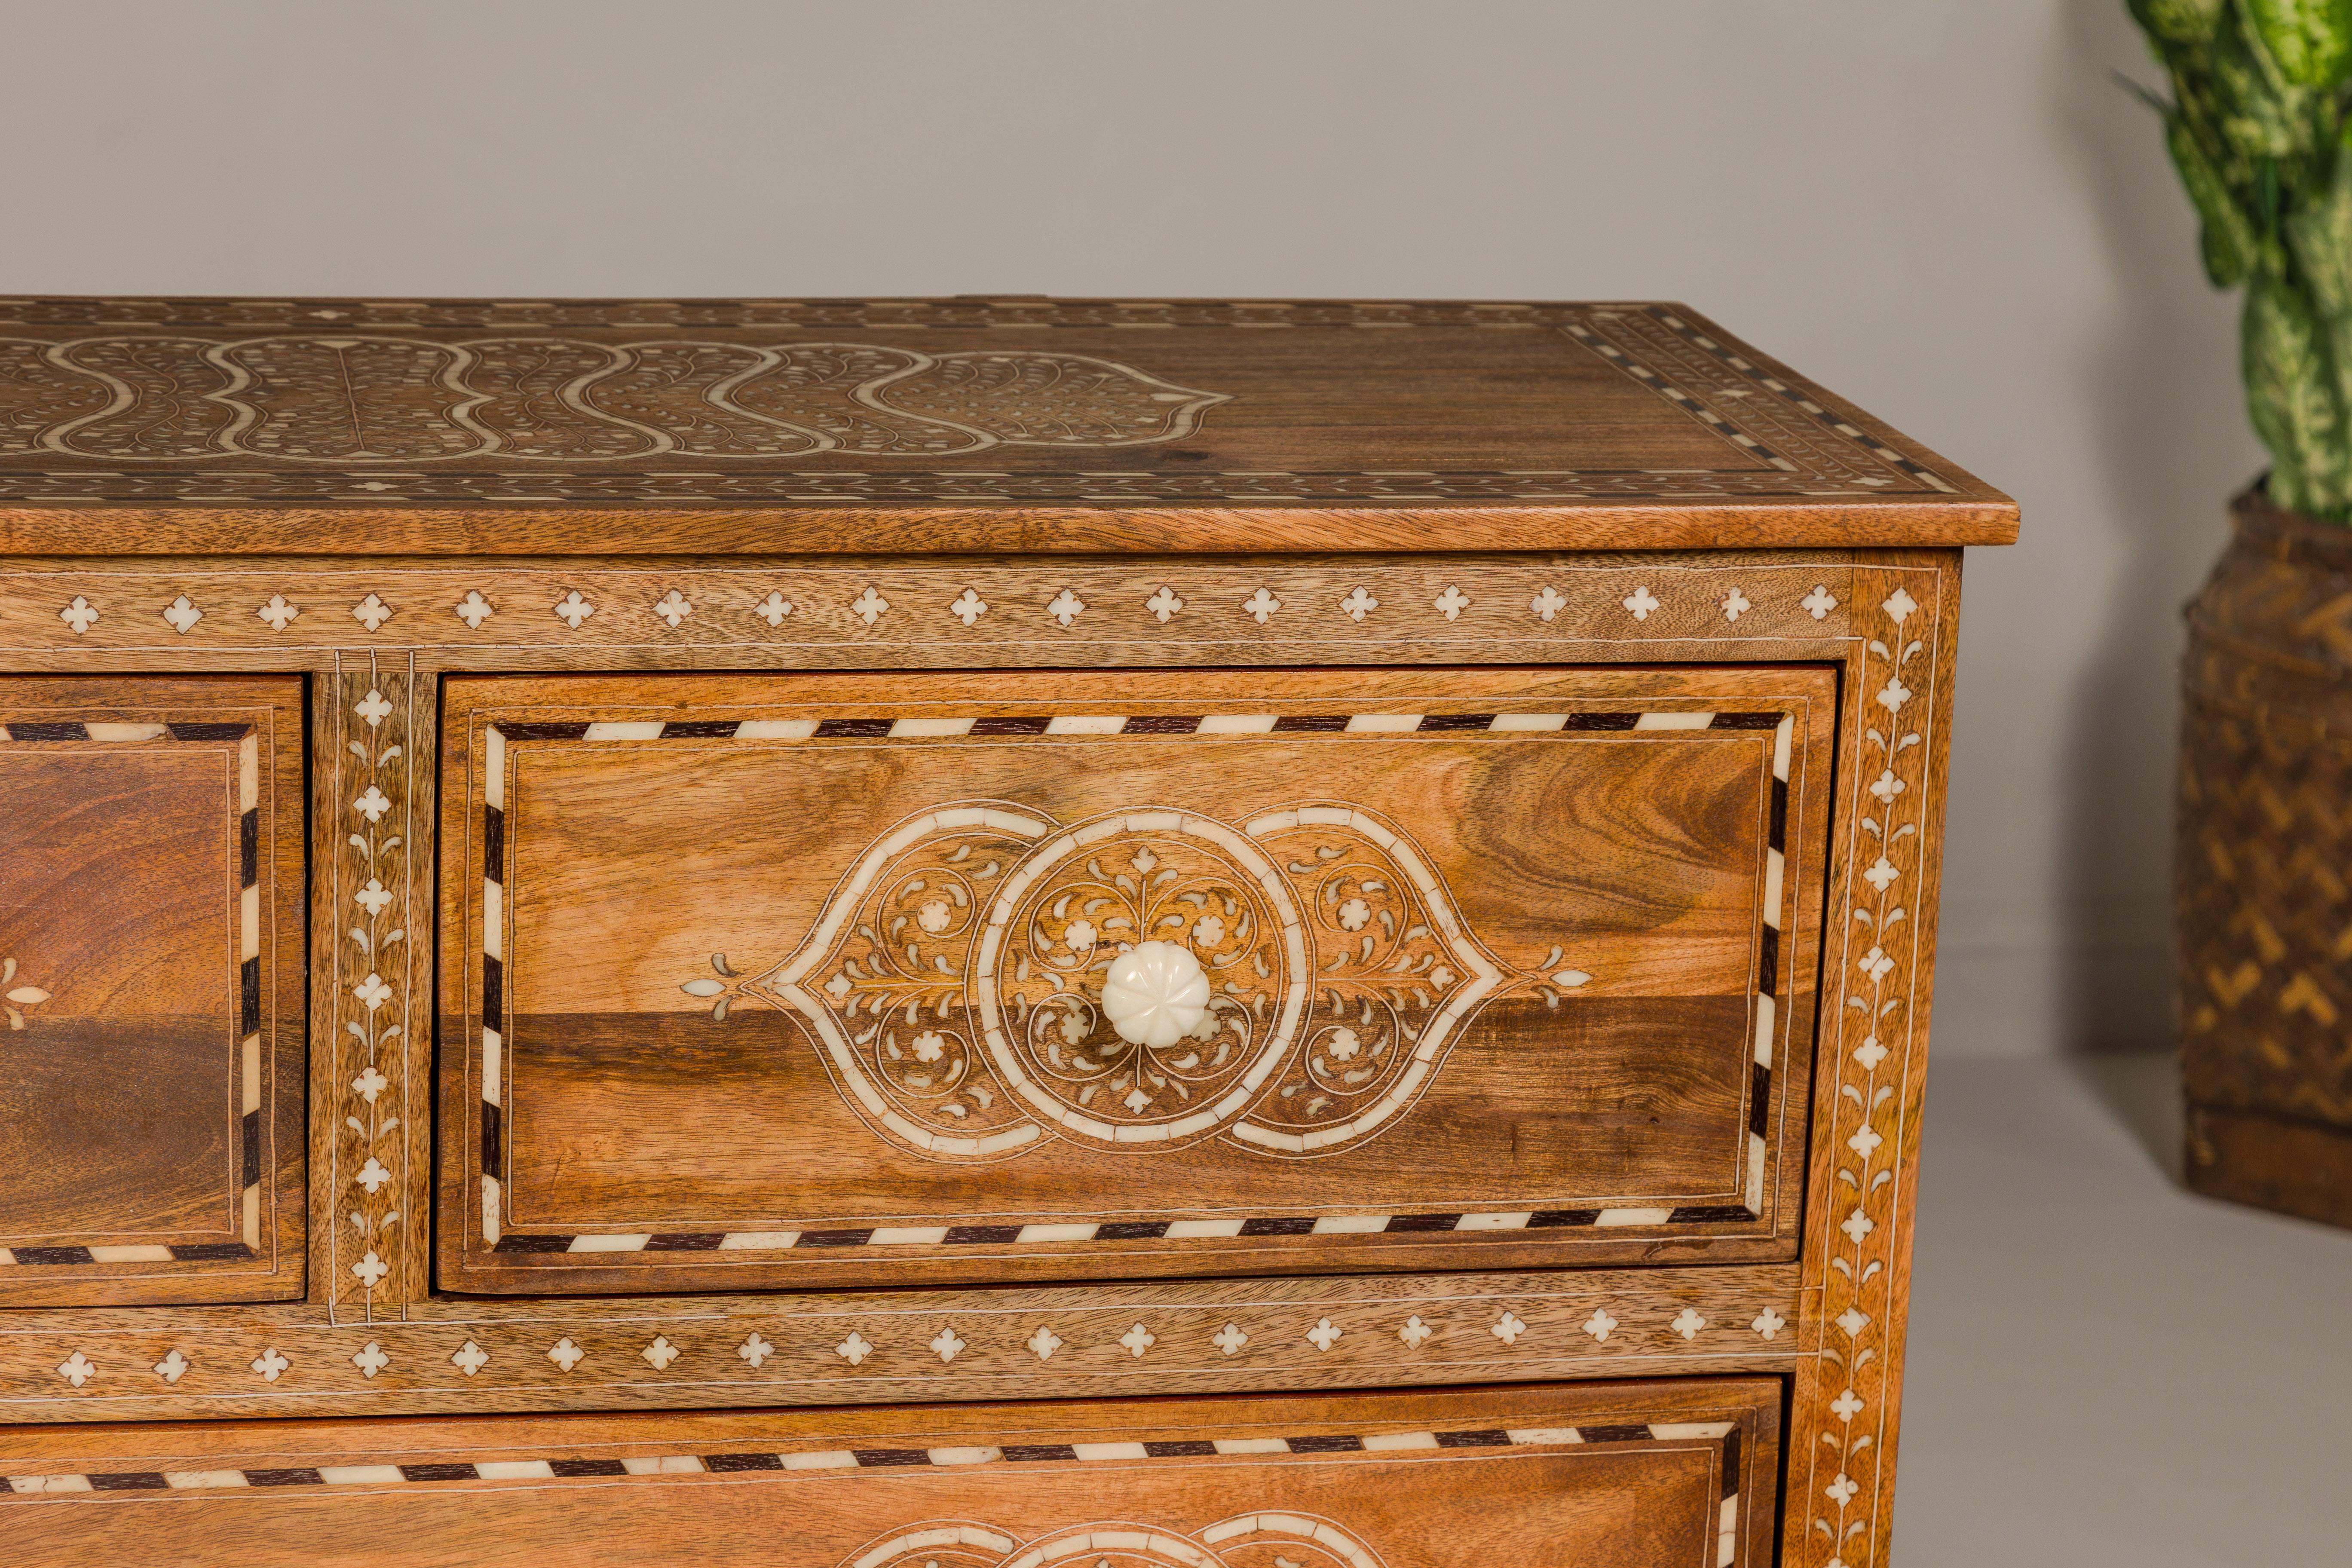 Anglo Indian Style Mango Wood Chest with Four Drawers and Floral Bone Inlay In Excellent Condition For Sale In Yonkers, NY